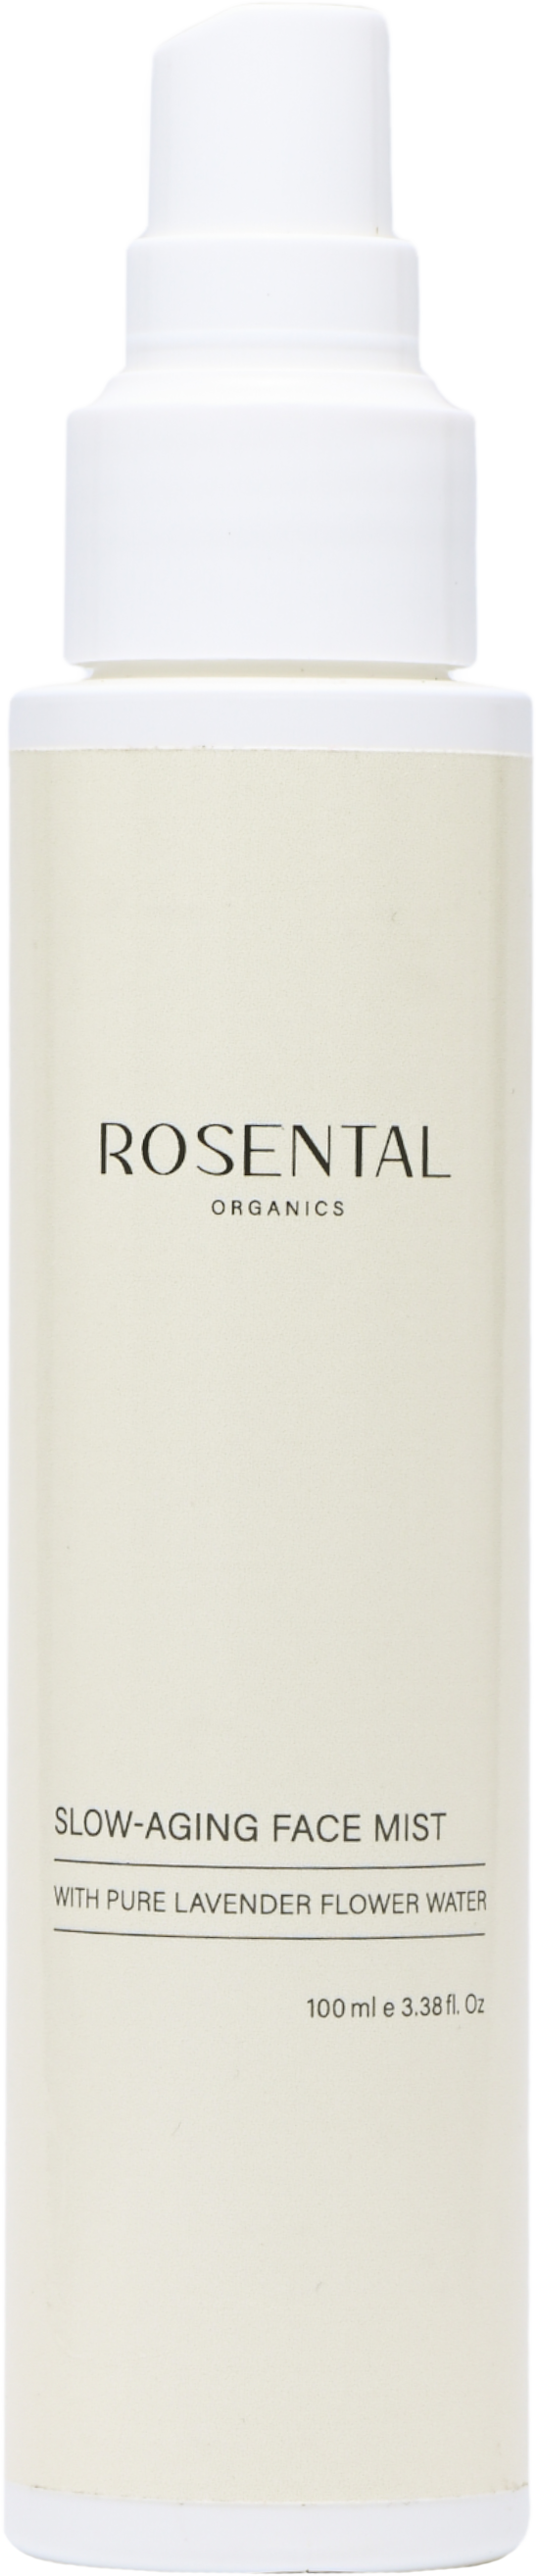 ROSENTAL Slow-Aging Face Mist | with pure lavender flower water